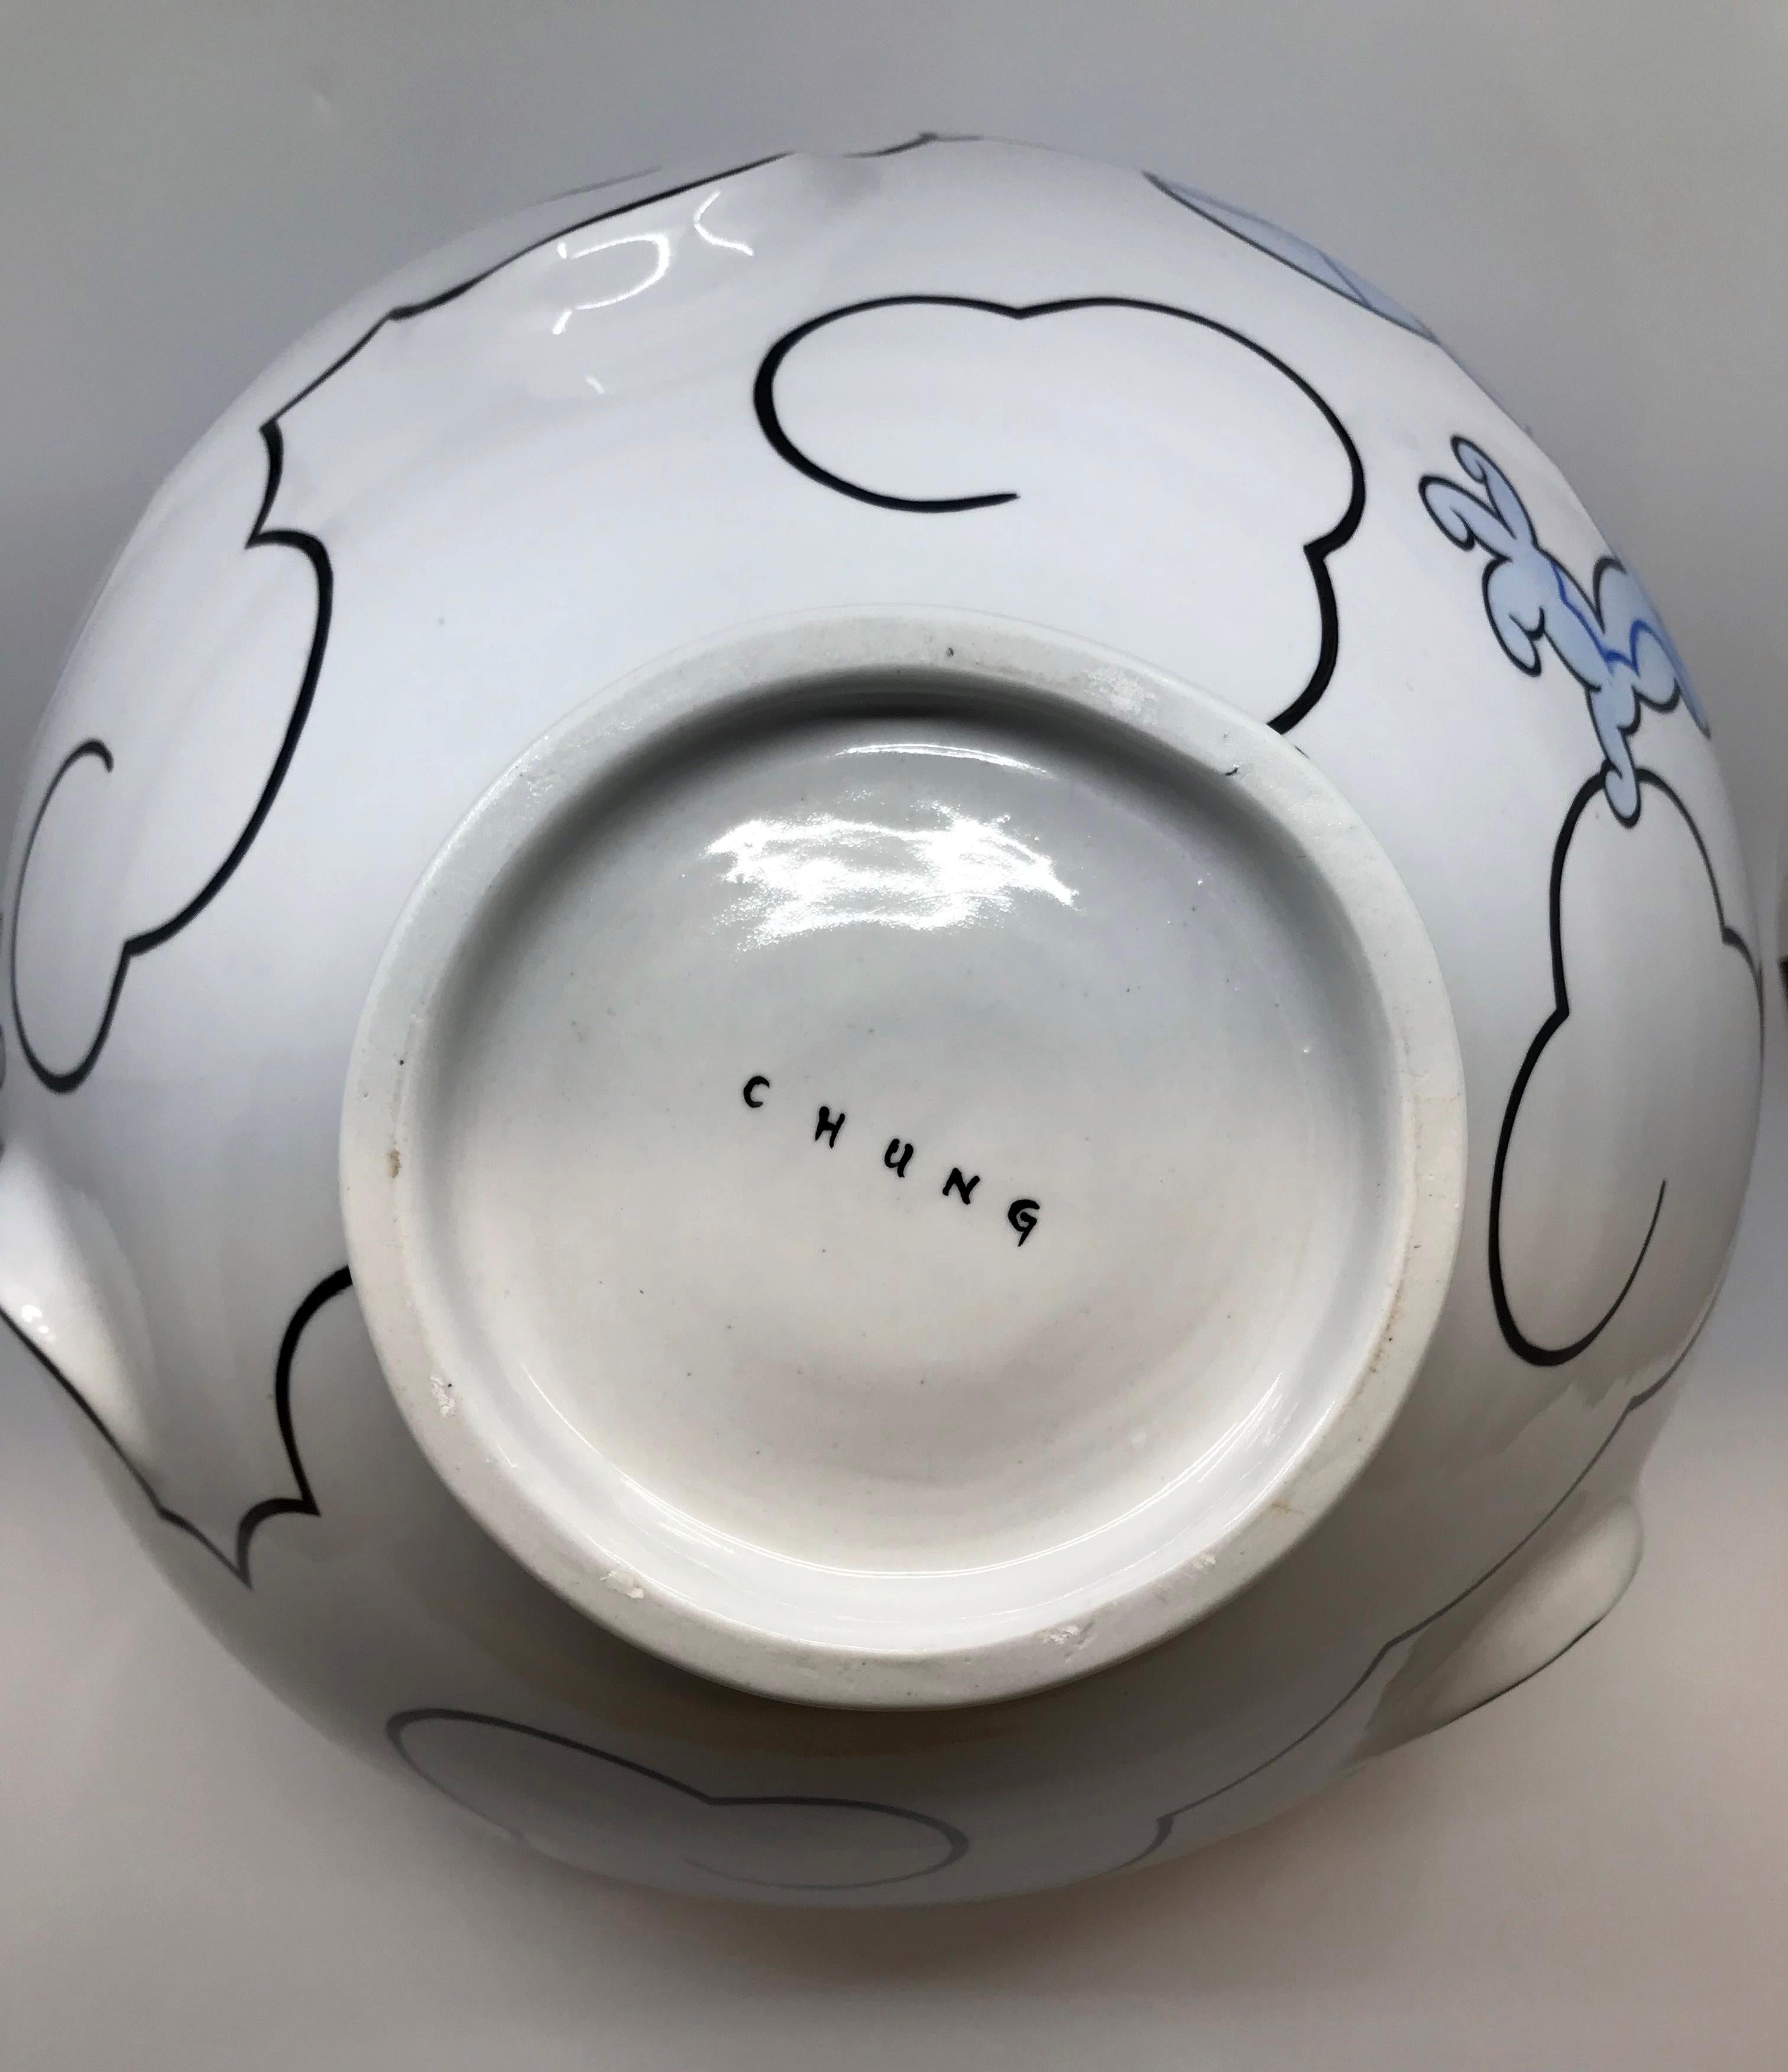 Sam Chung lives and works in Tempe, AZ. He is a ceramic artist and Professor of Art at Arizona State University.  As a second-generation Korean-American, he explores pottery that reframes historical ceramics from a cross-cultural perspective and